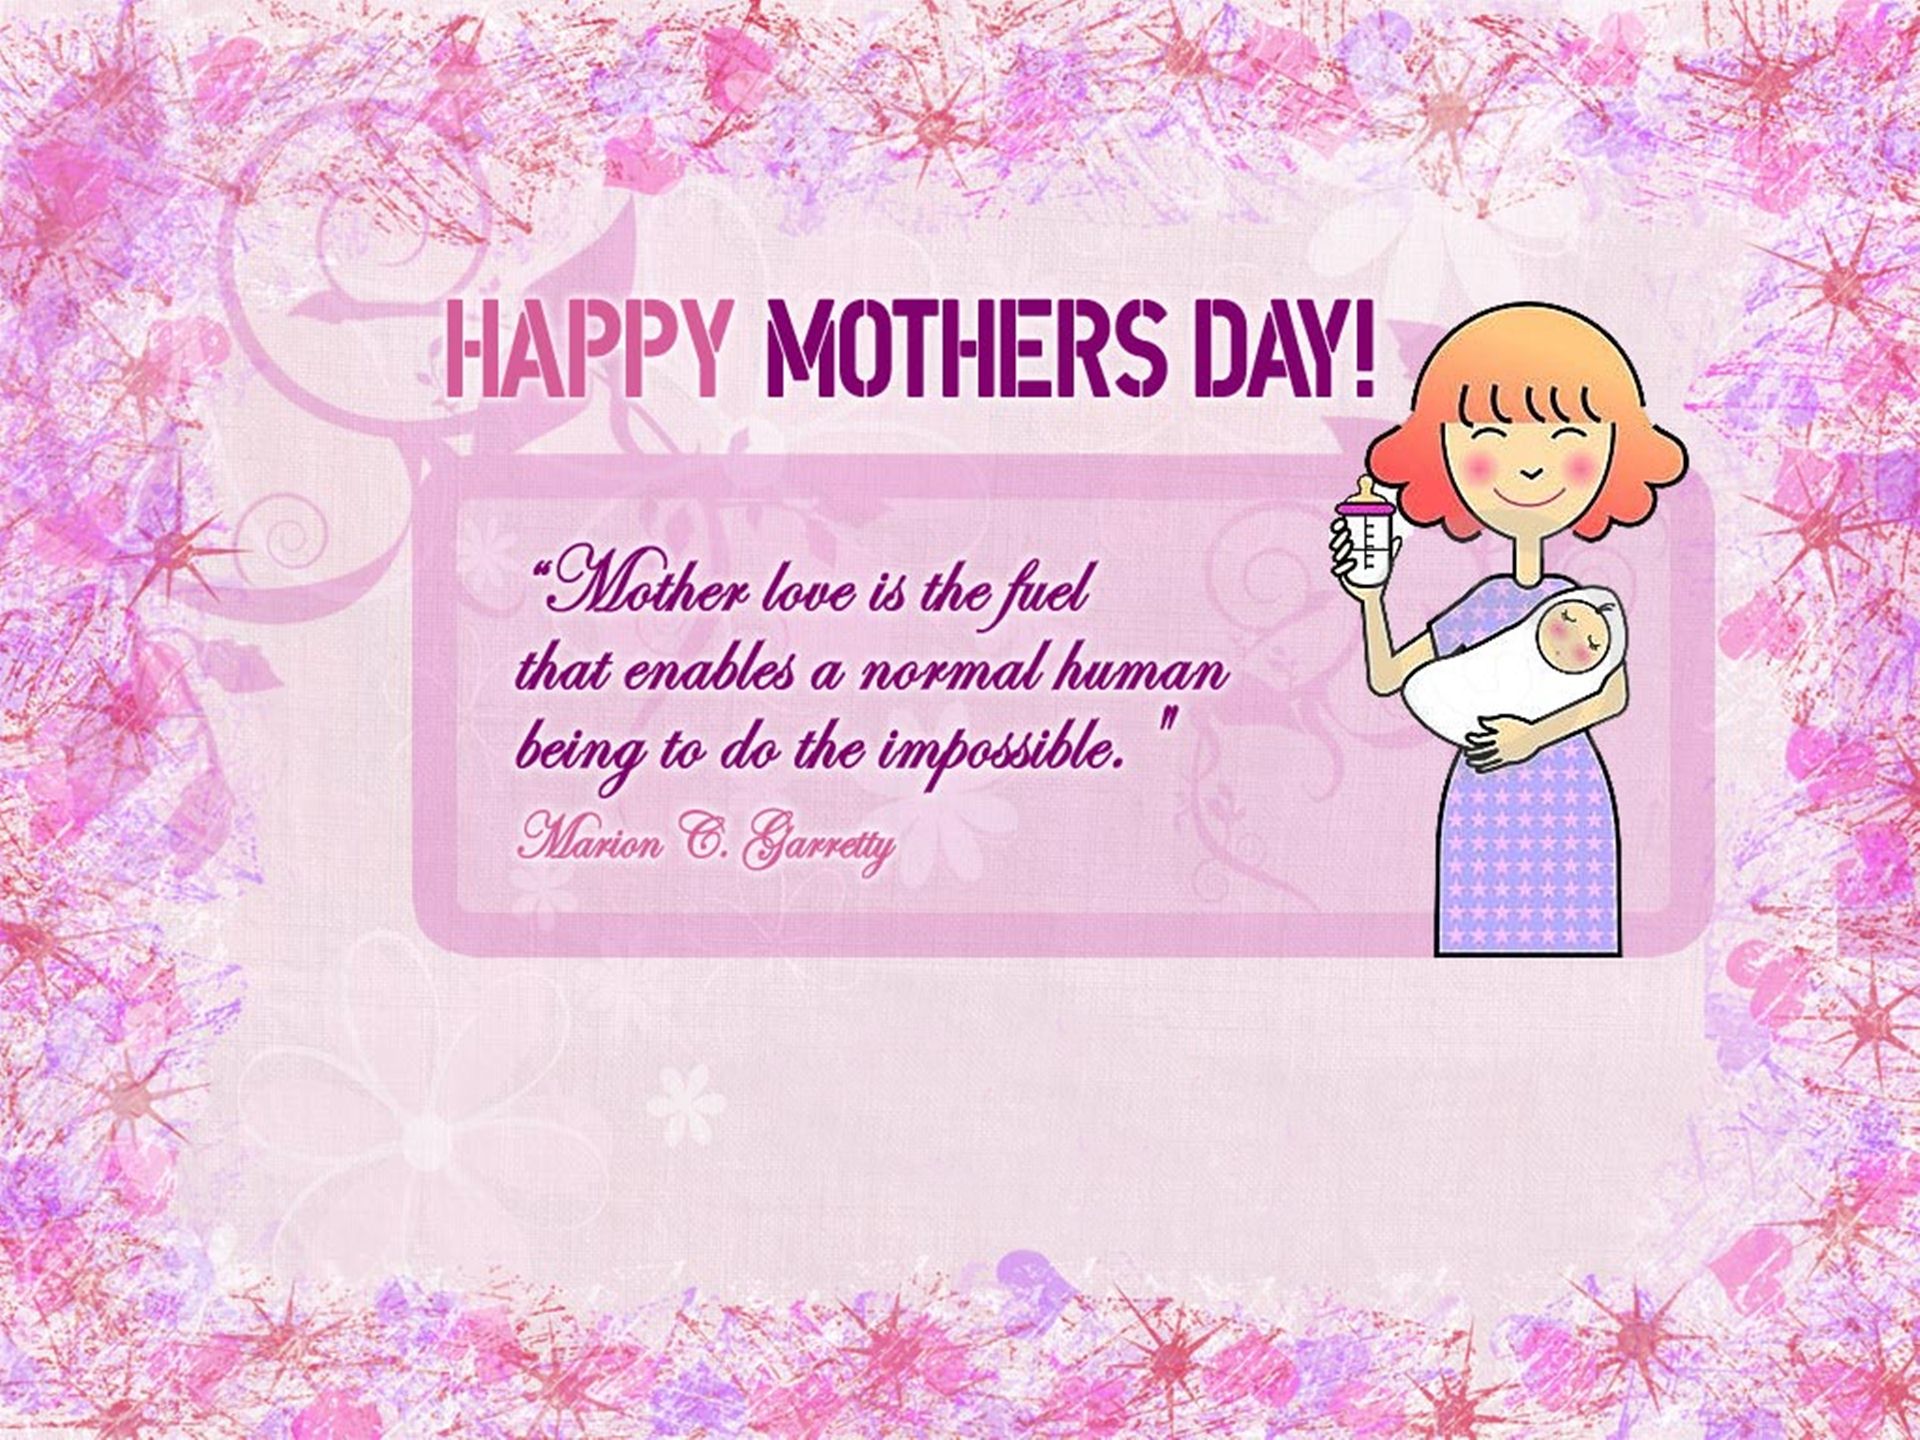 Mothers Day Quotes Wallpaper - Mother's Day Poems For Friends - HD Wallpaper 